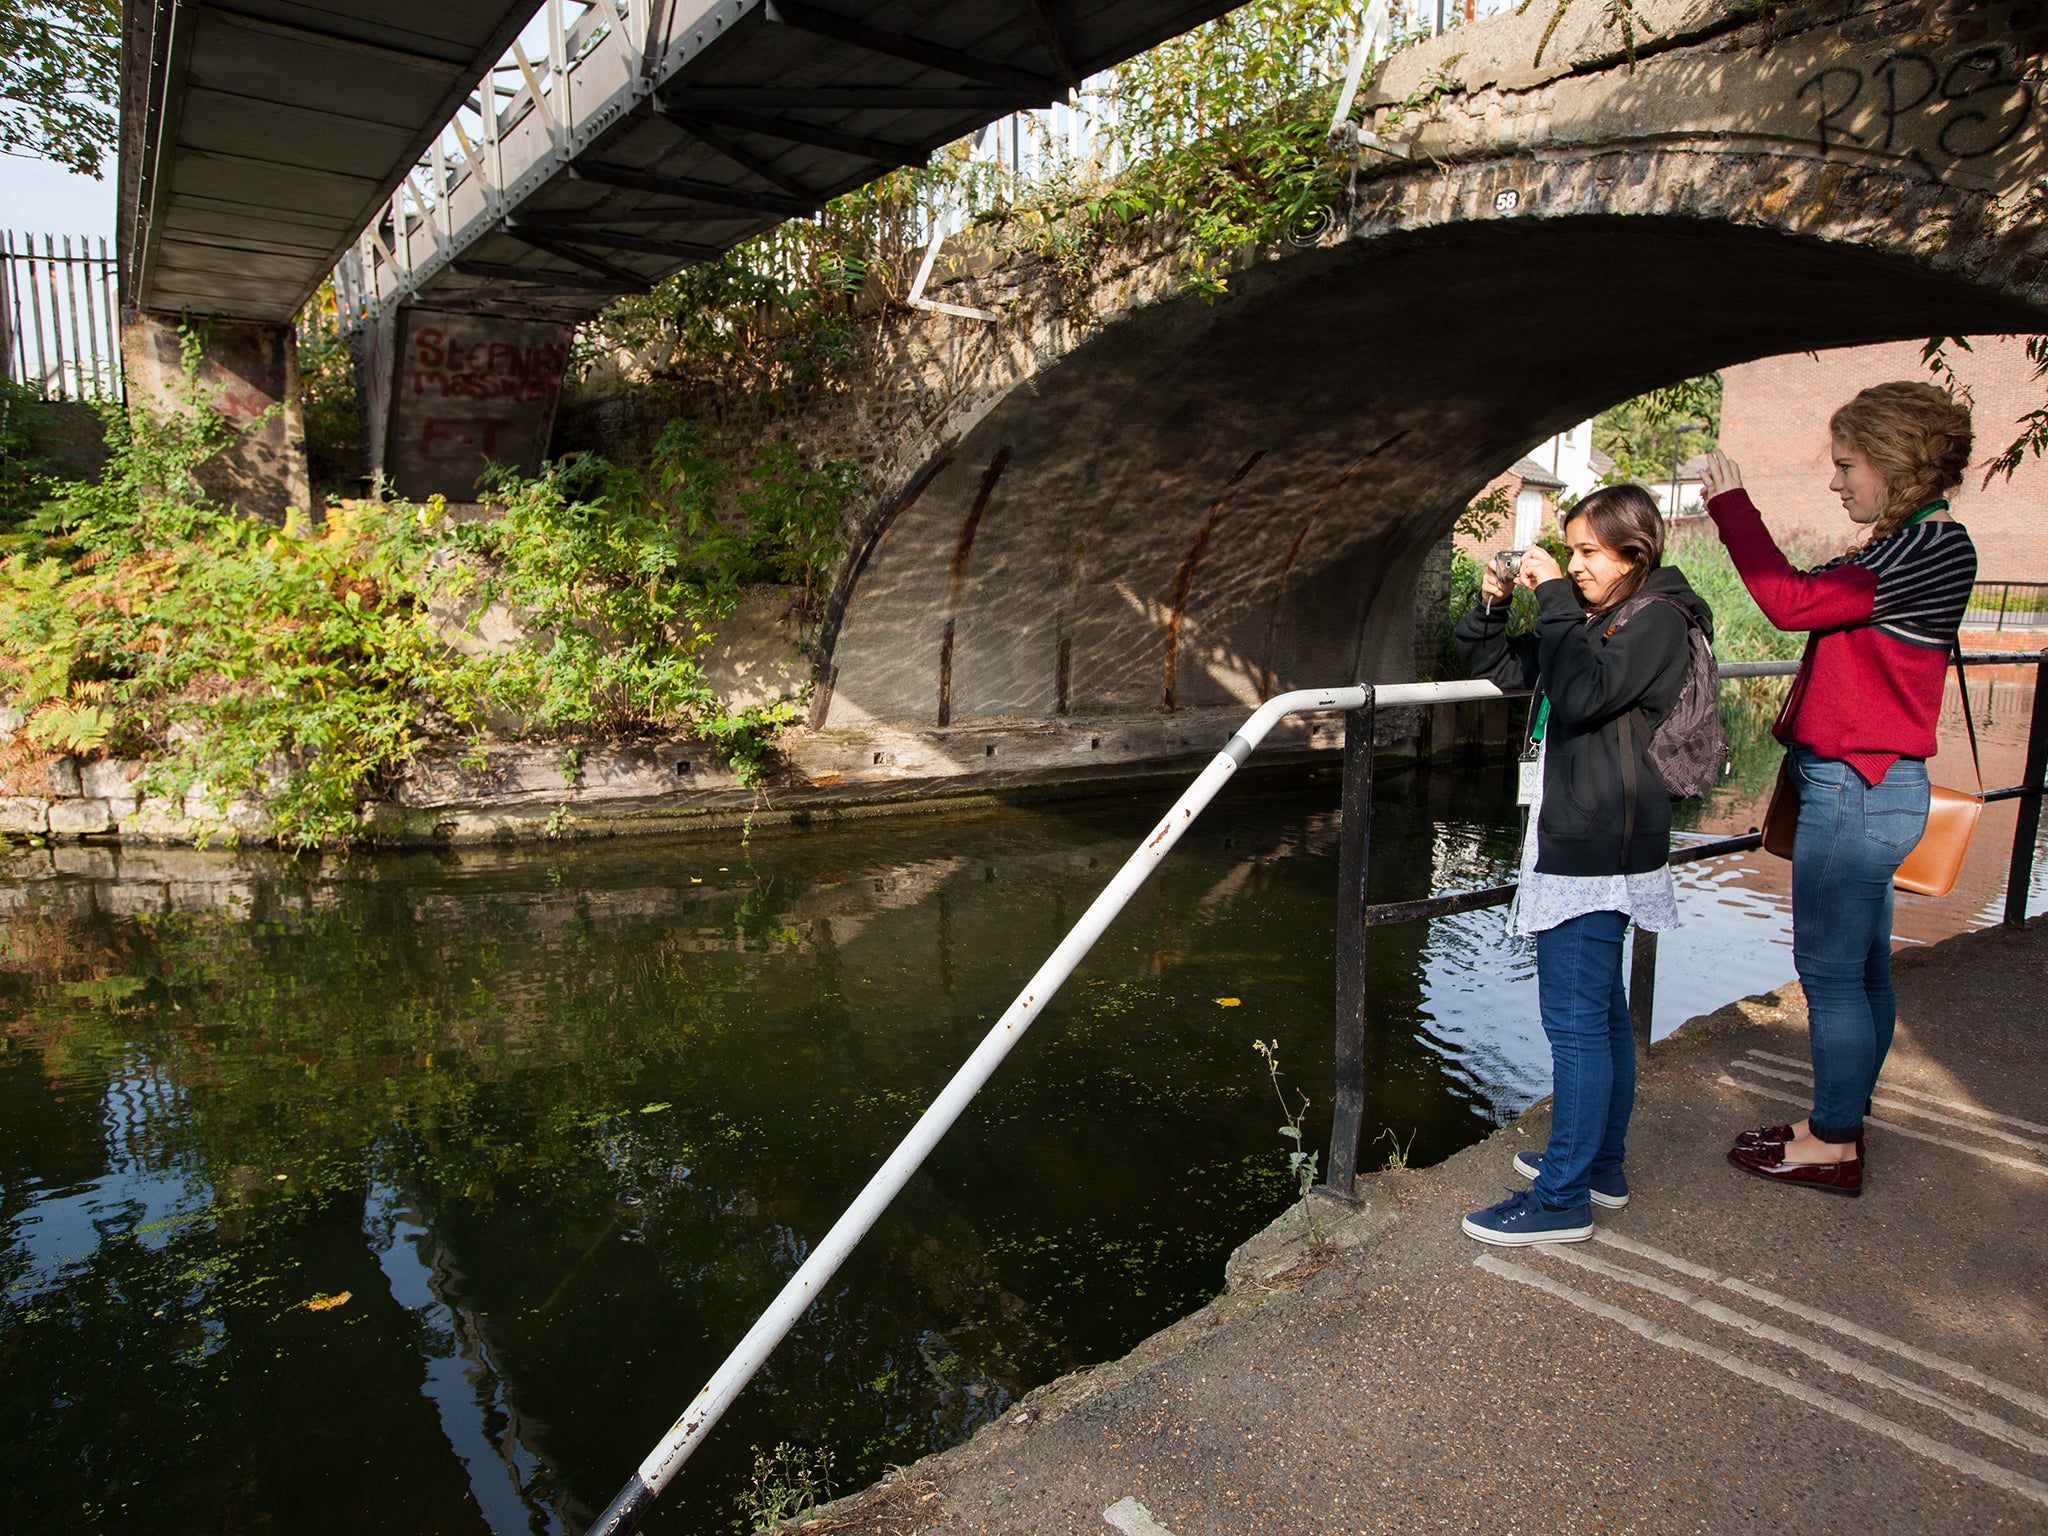 Undergraduate Geography students participate in research program as part of wider project to create worlds first urban national park. Next to canal in Mile End park east London.